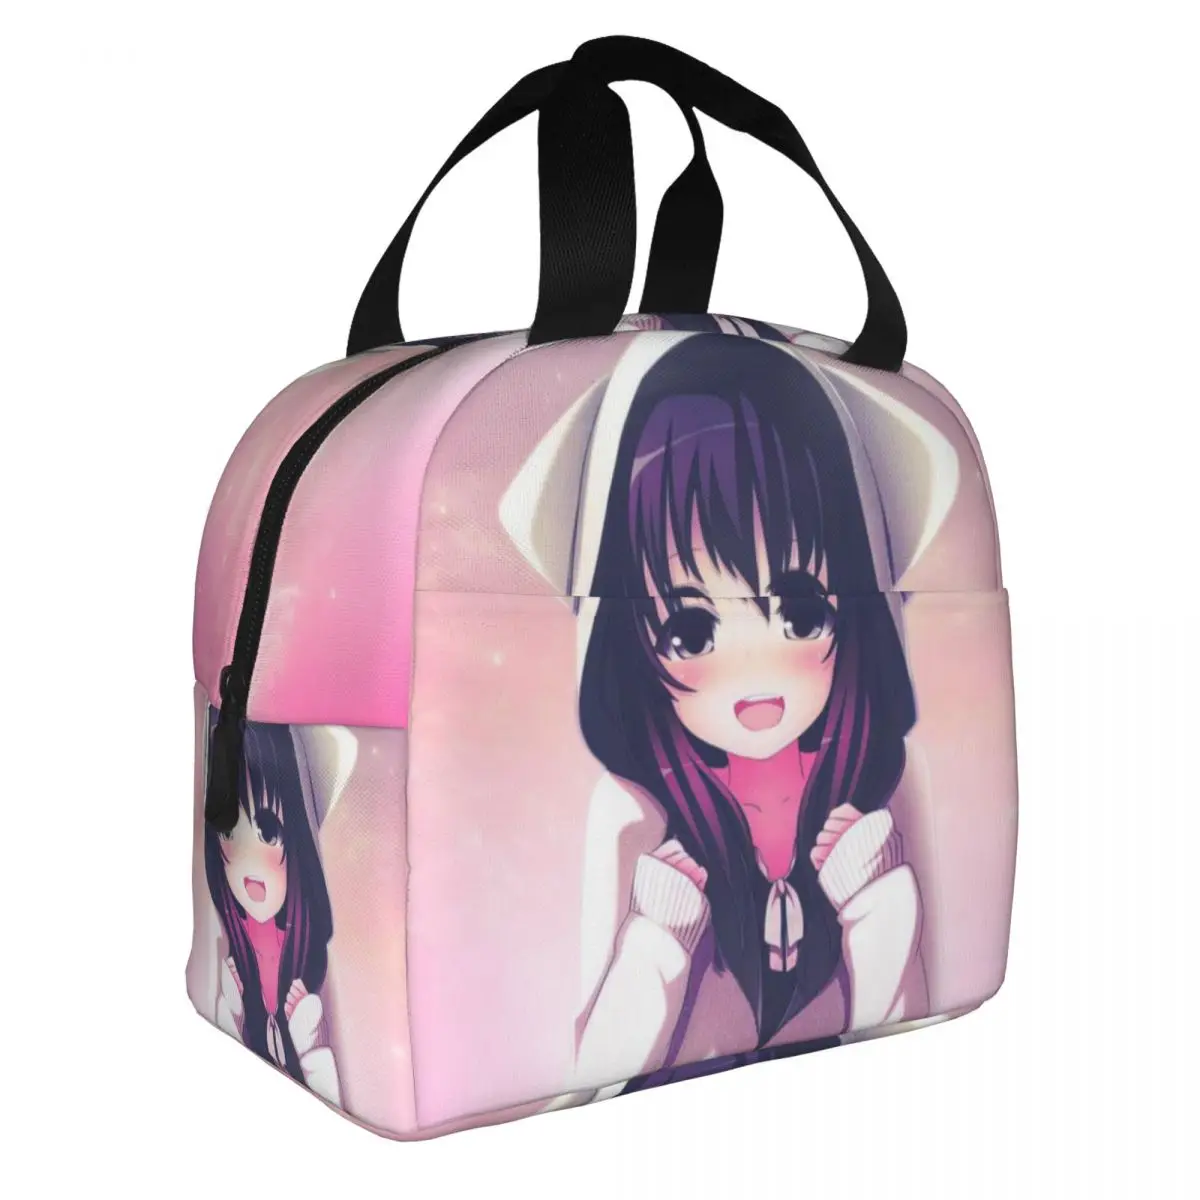 Cute Manga Kawaii Anime Girl Lunch Bento Bags Portable Aluminum Foil thickened Thermal Cloth Lunch Bag for Boys and Girls